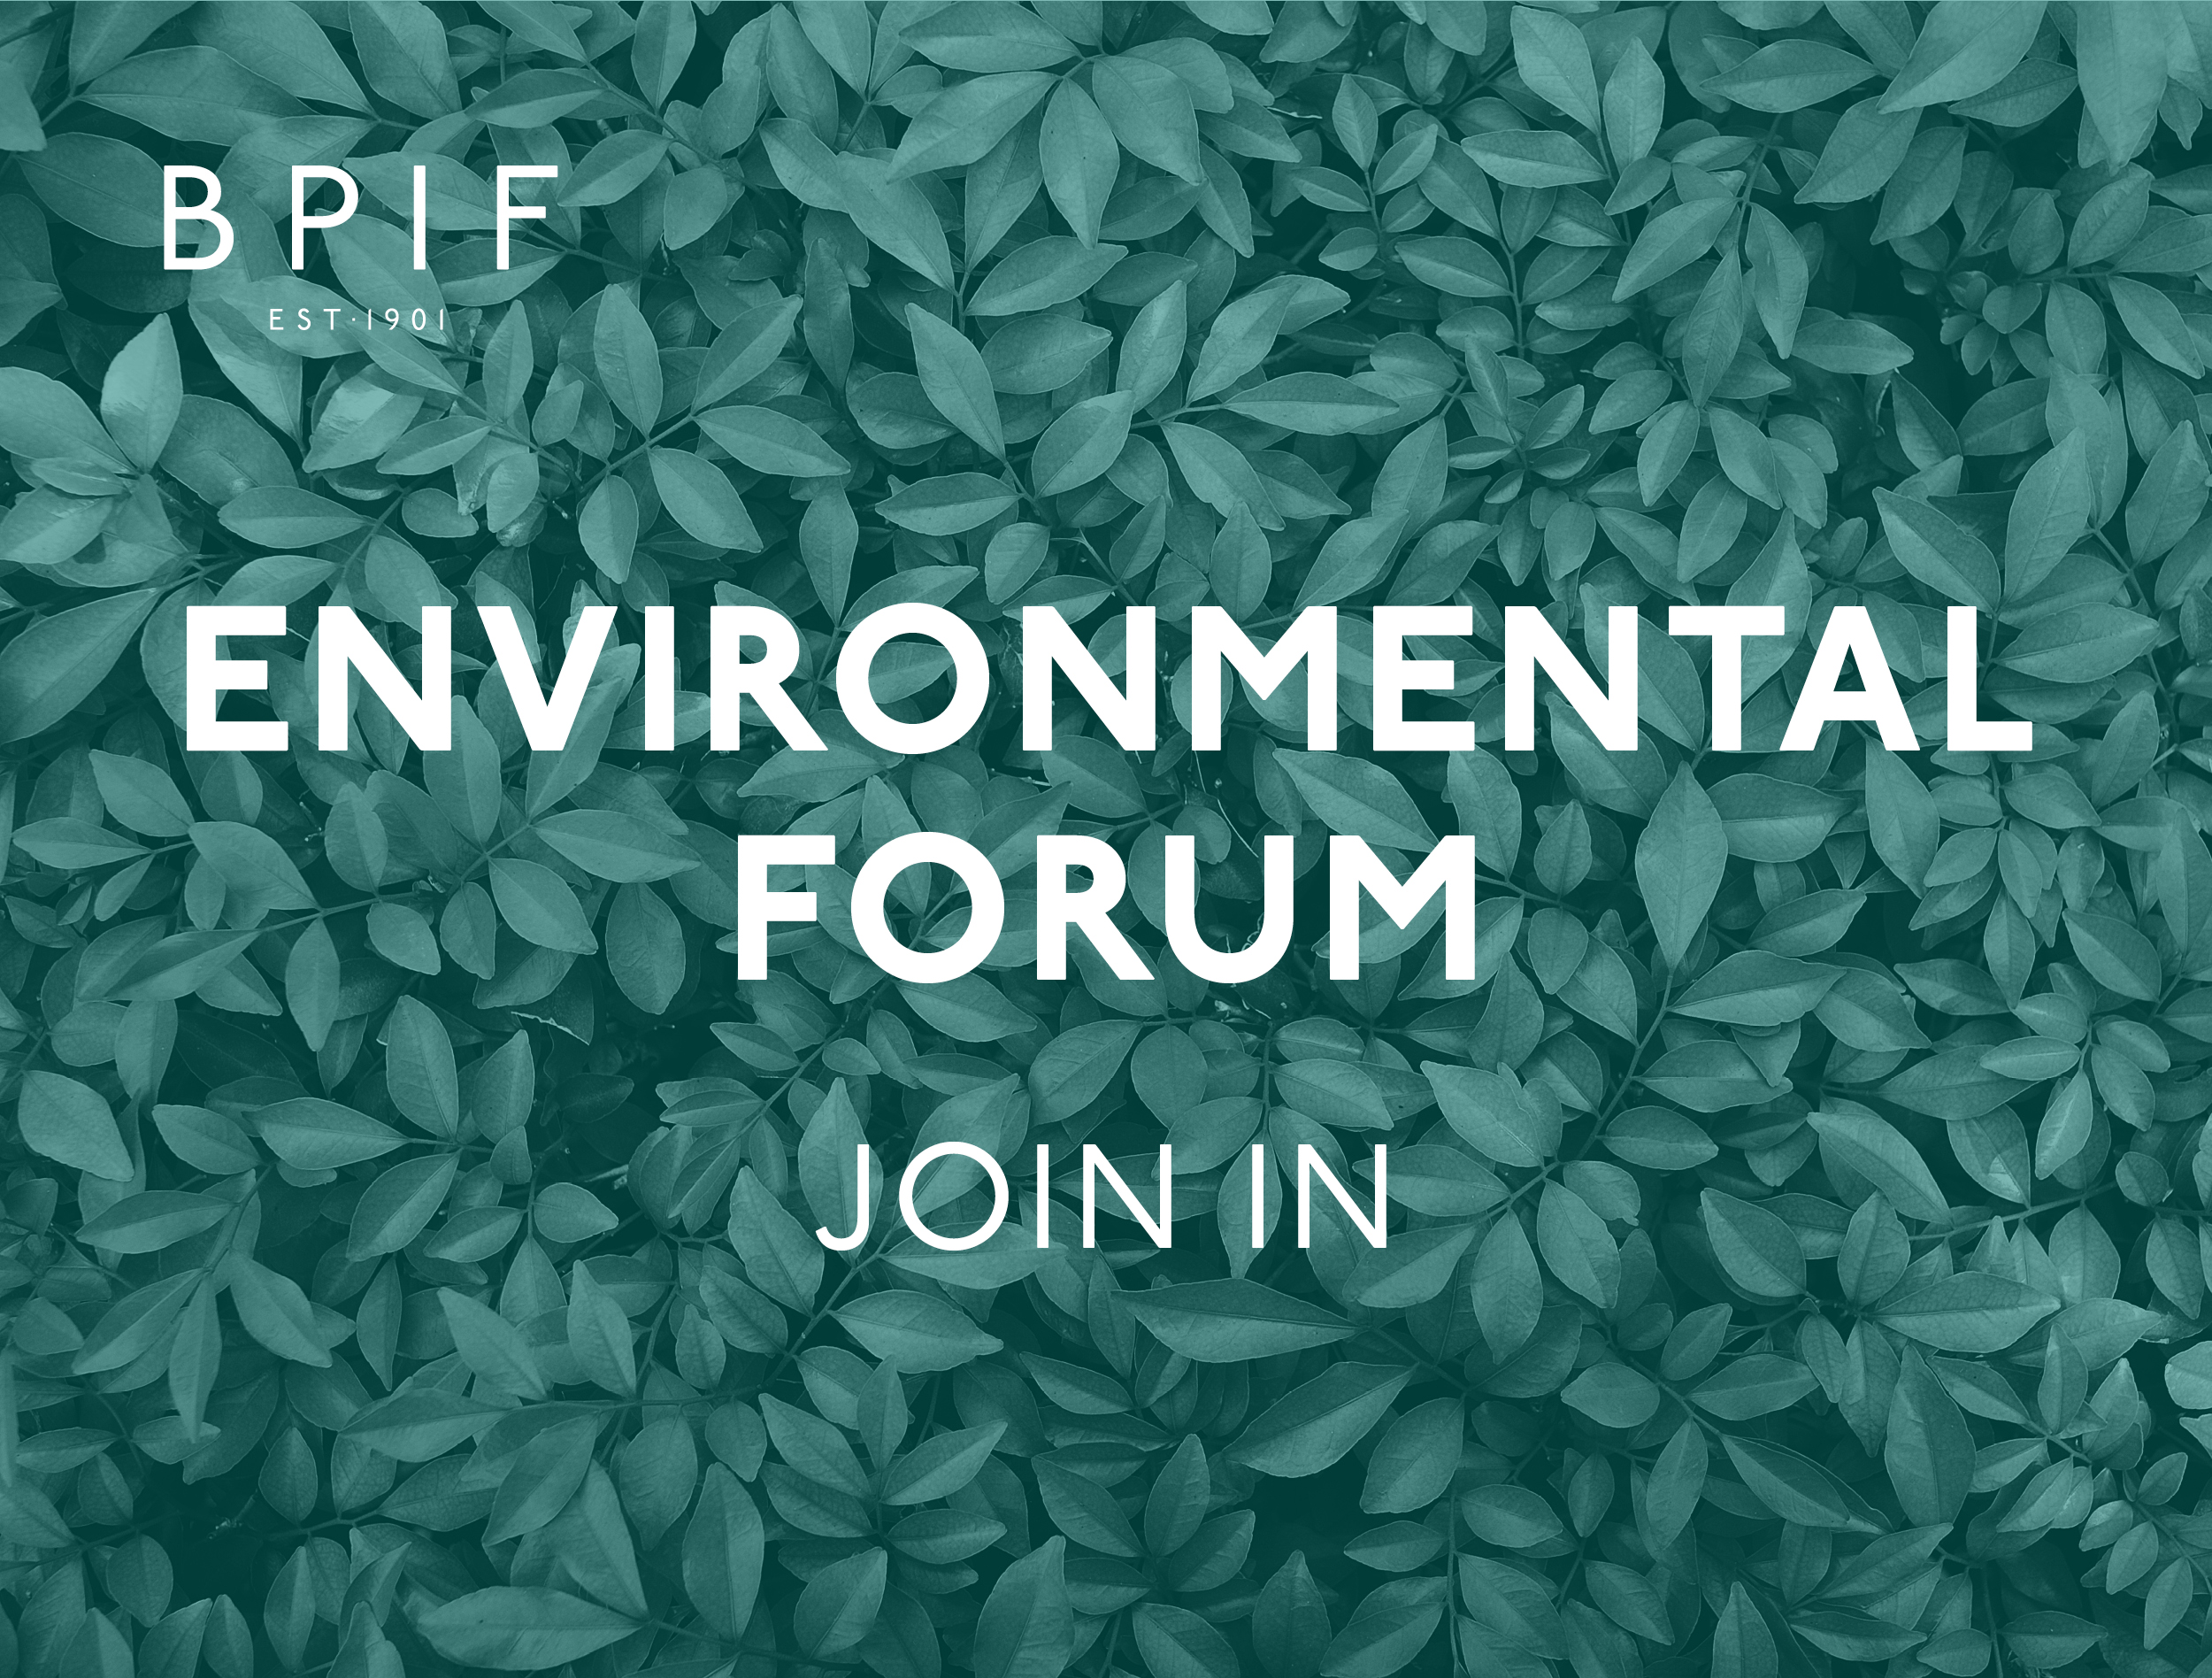 BPIF Environment - Working with the Supply Chain, Clients & Consumers